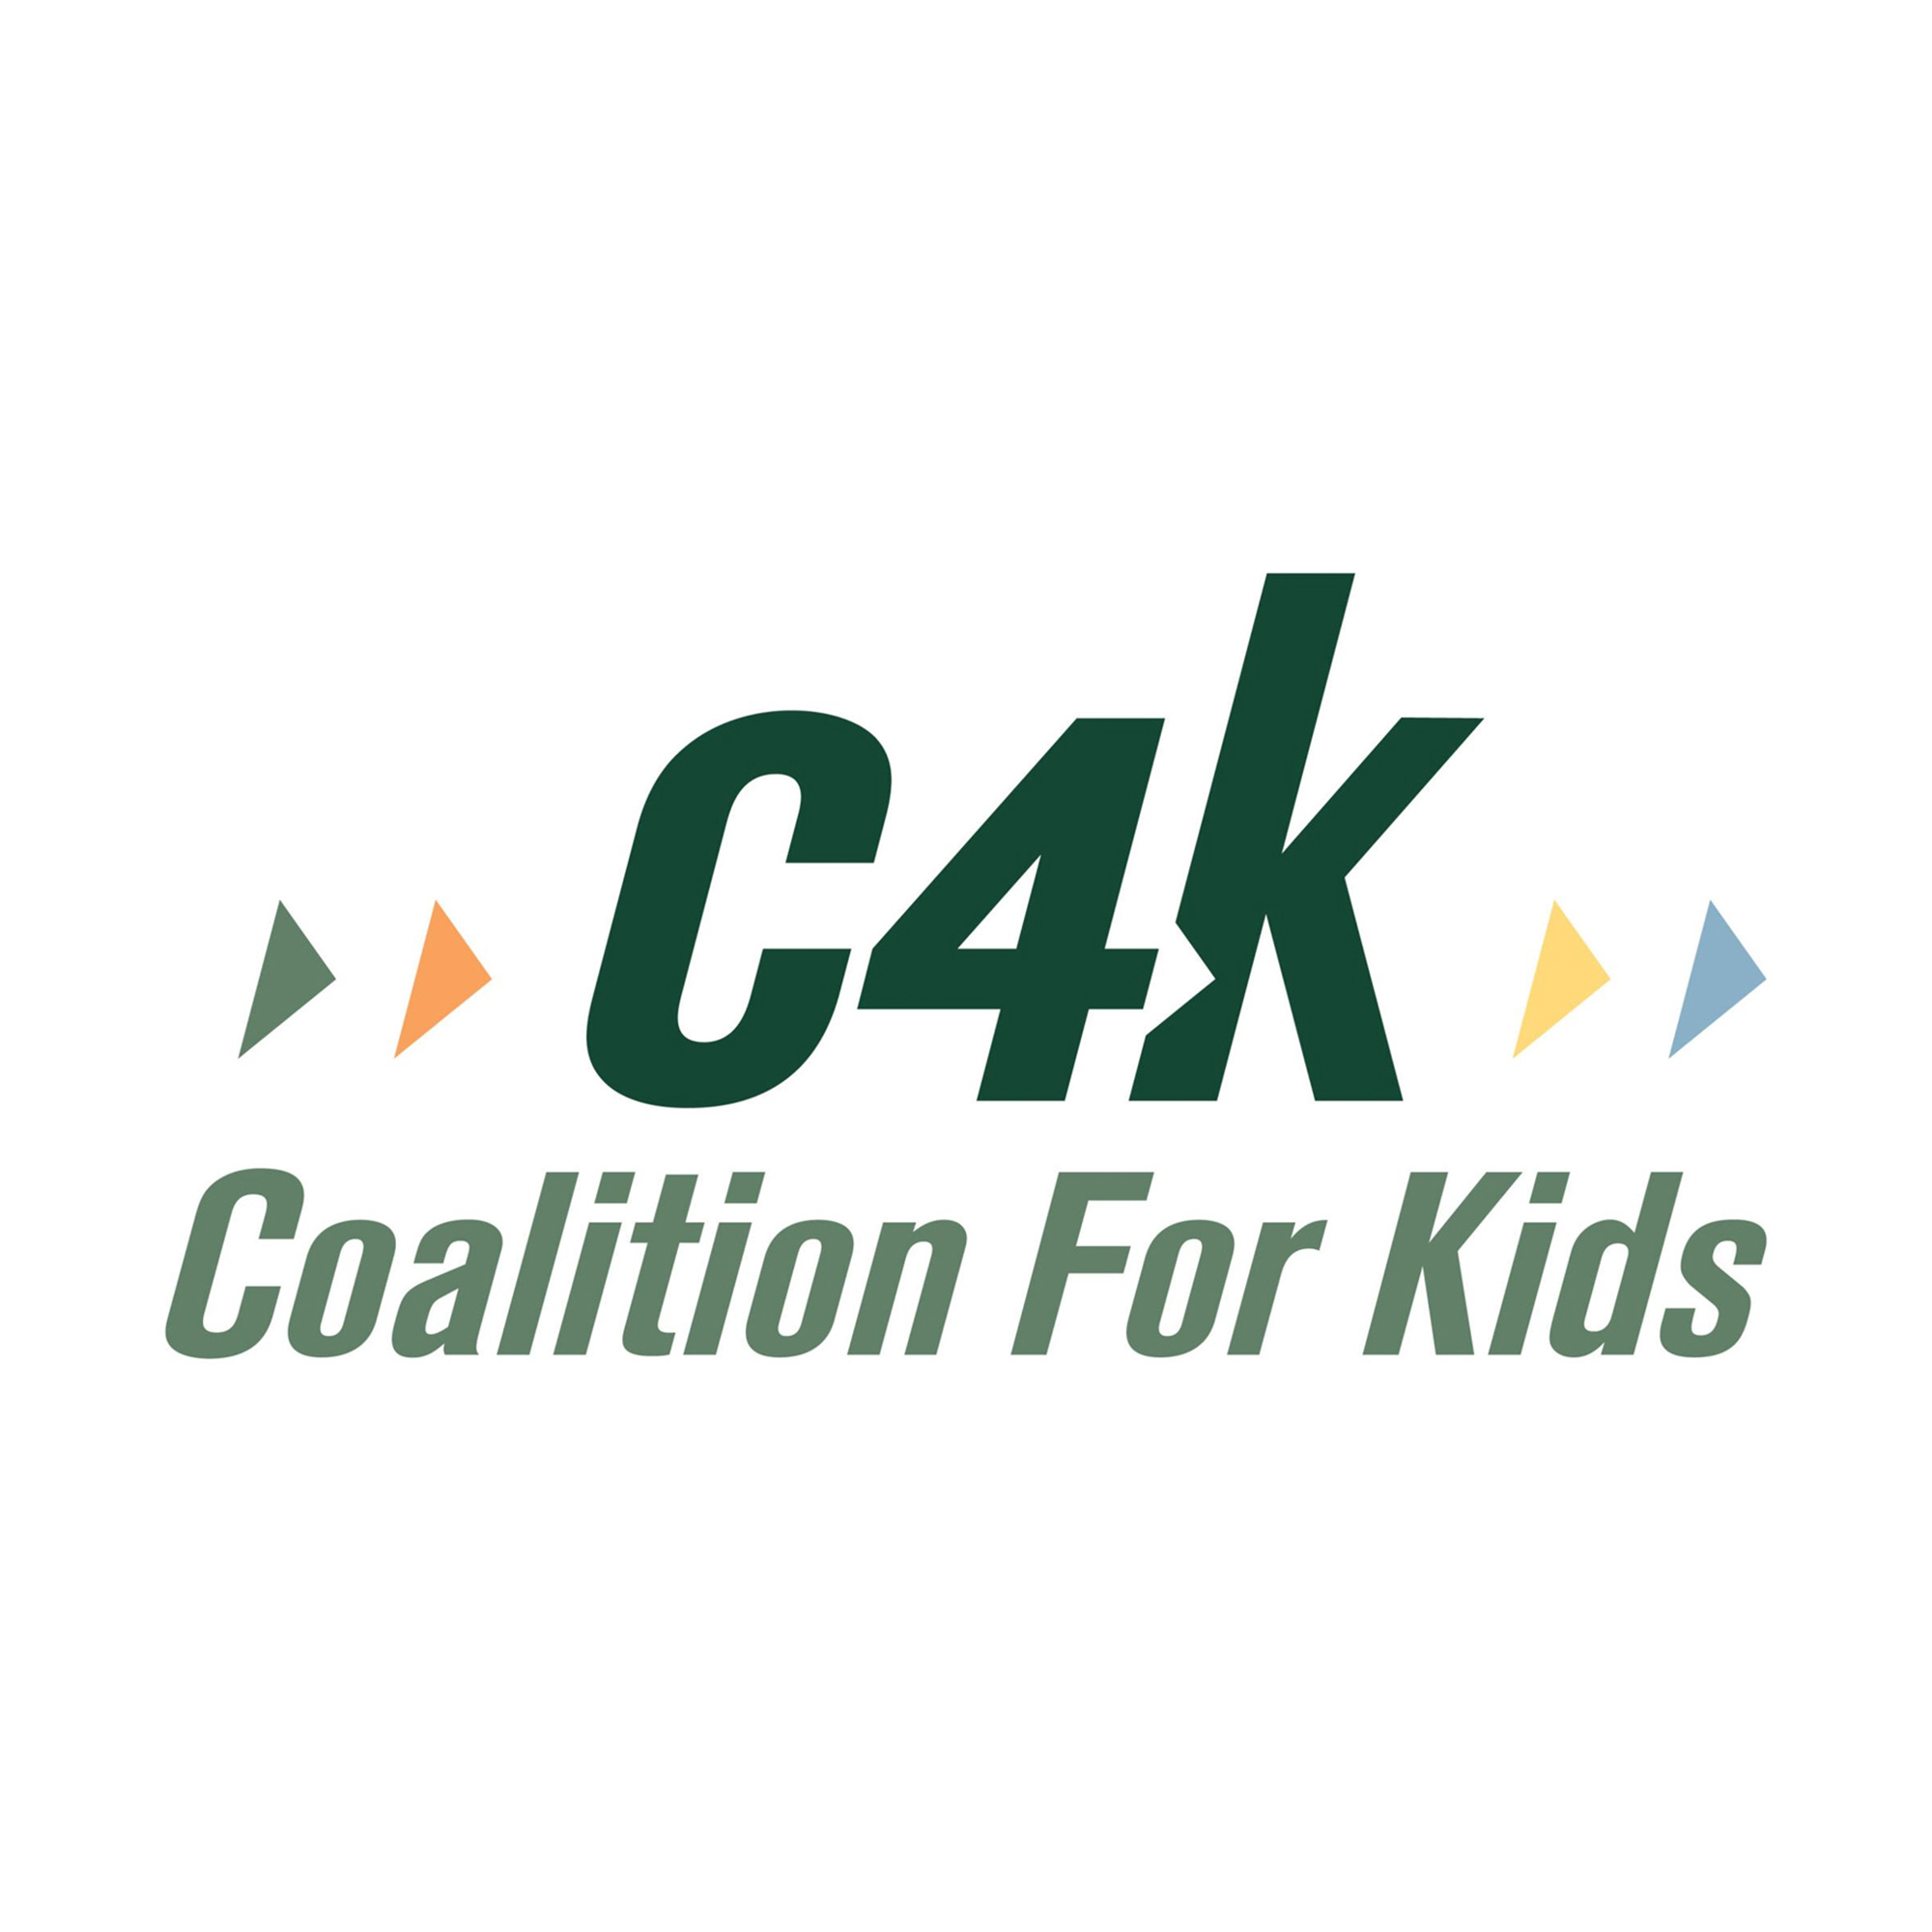 COALITION FOR KIDS